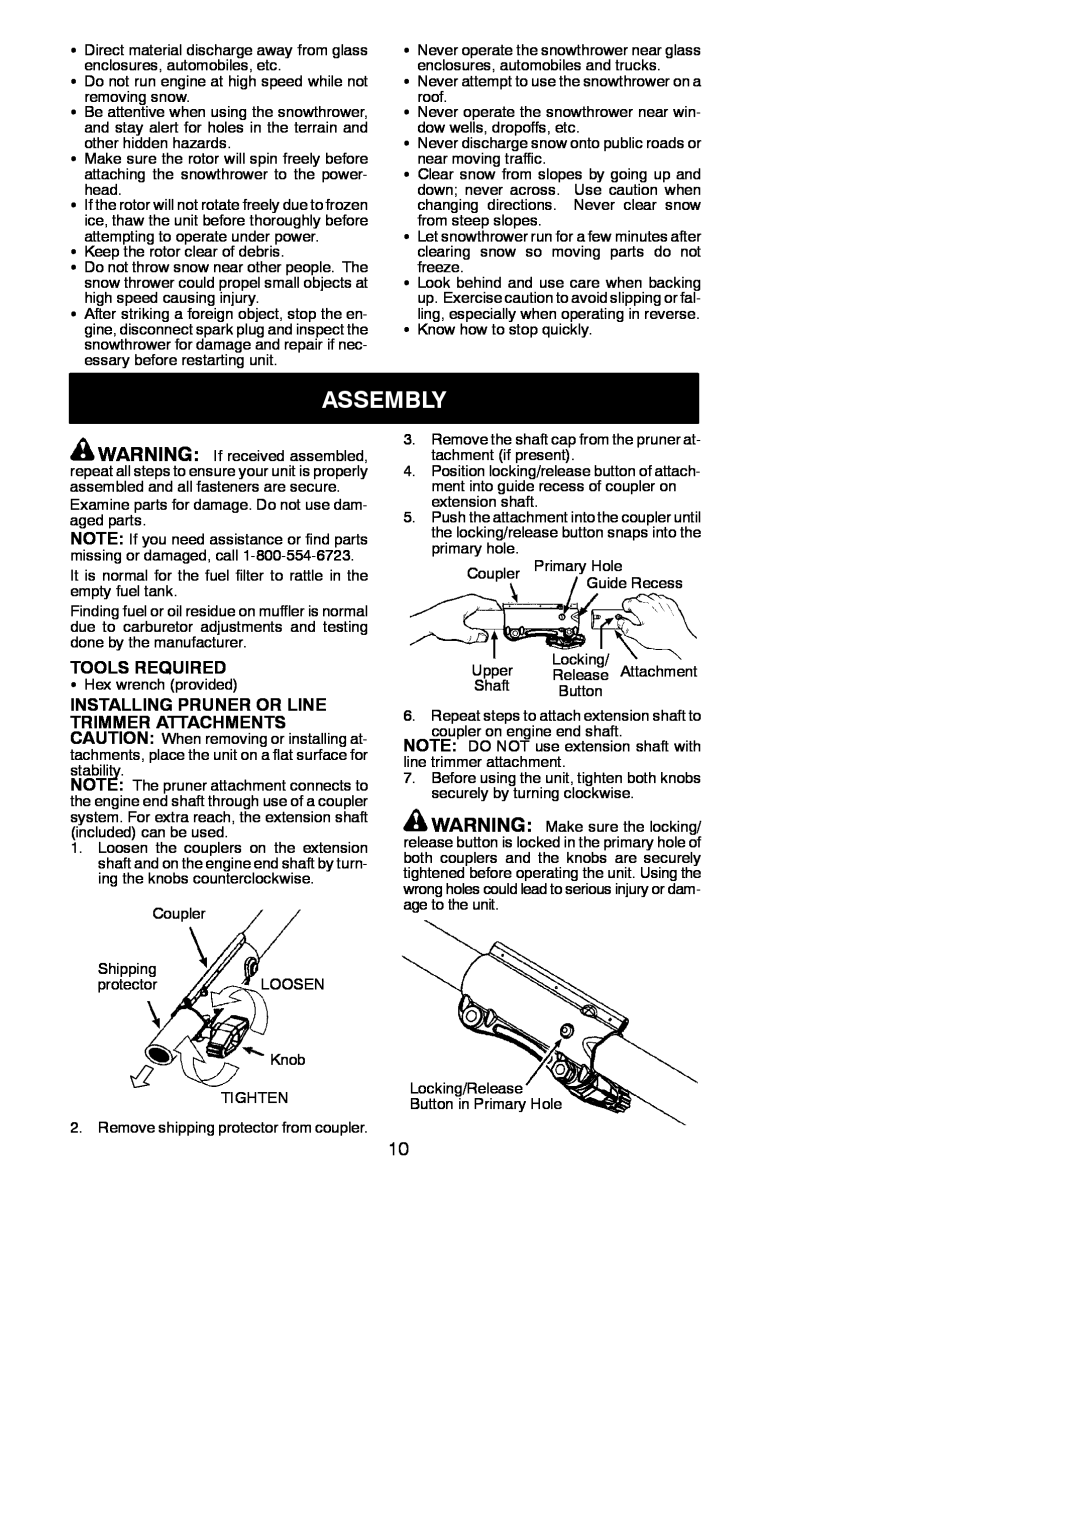 Poulan 966423701, 115244926 instruction manual Assembly, Tools Required 